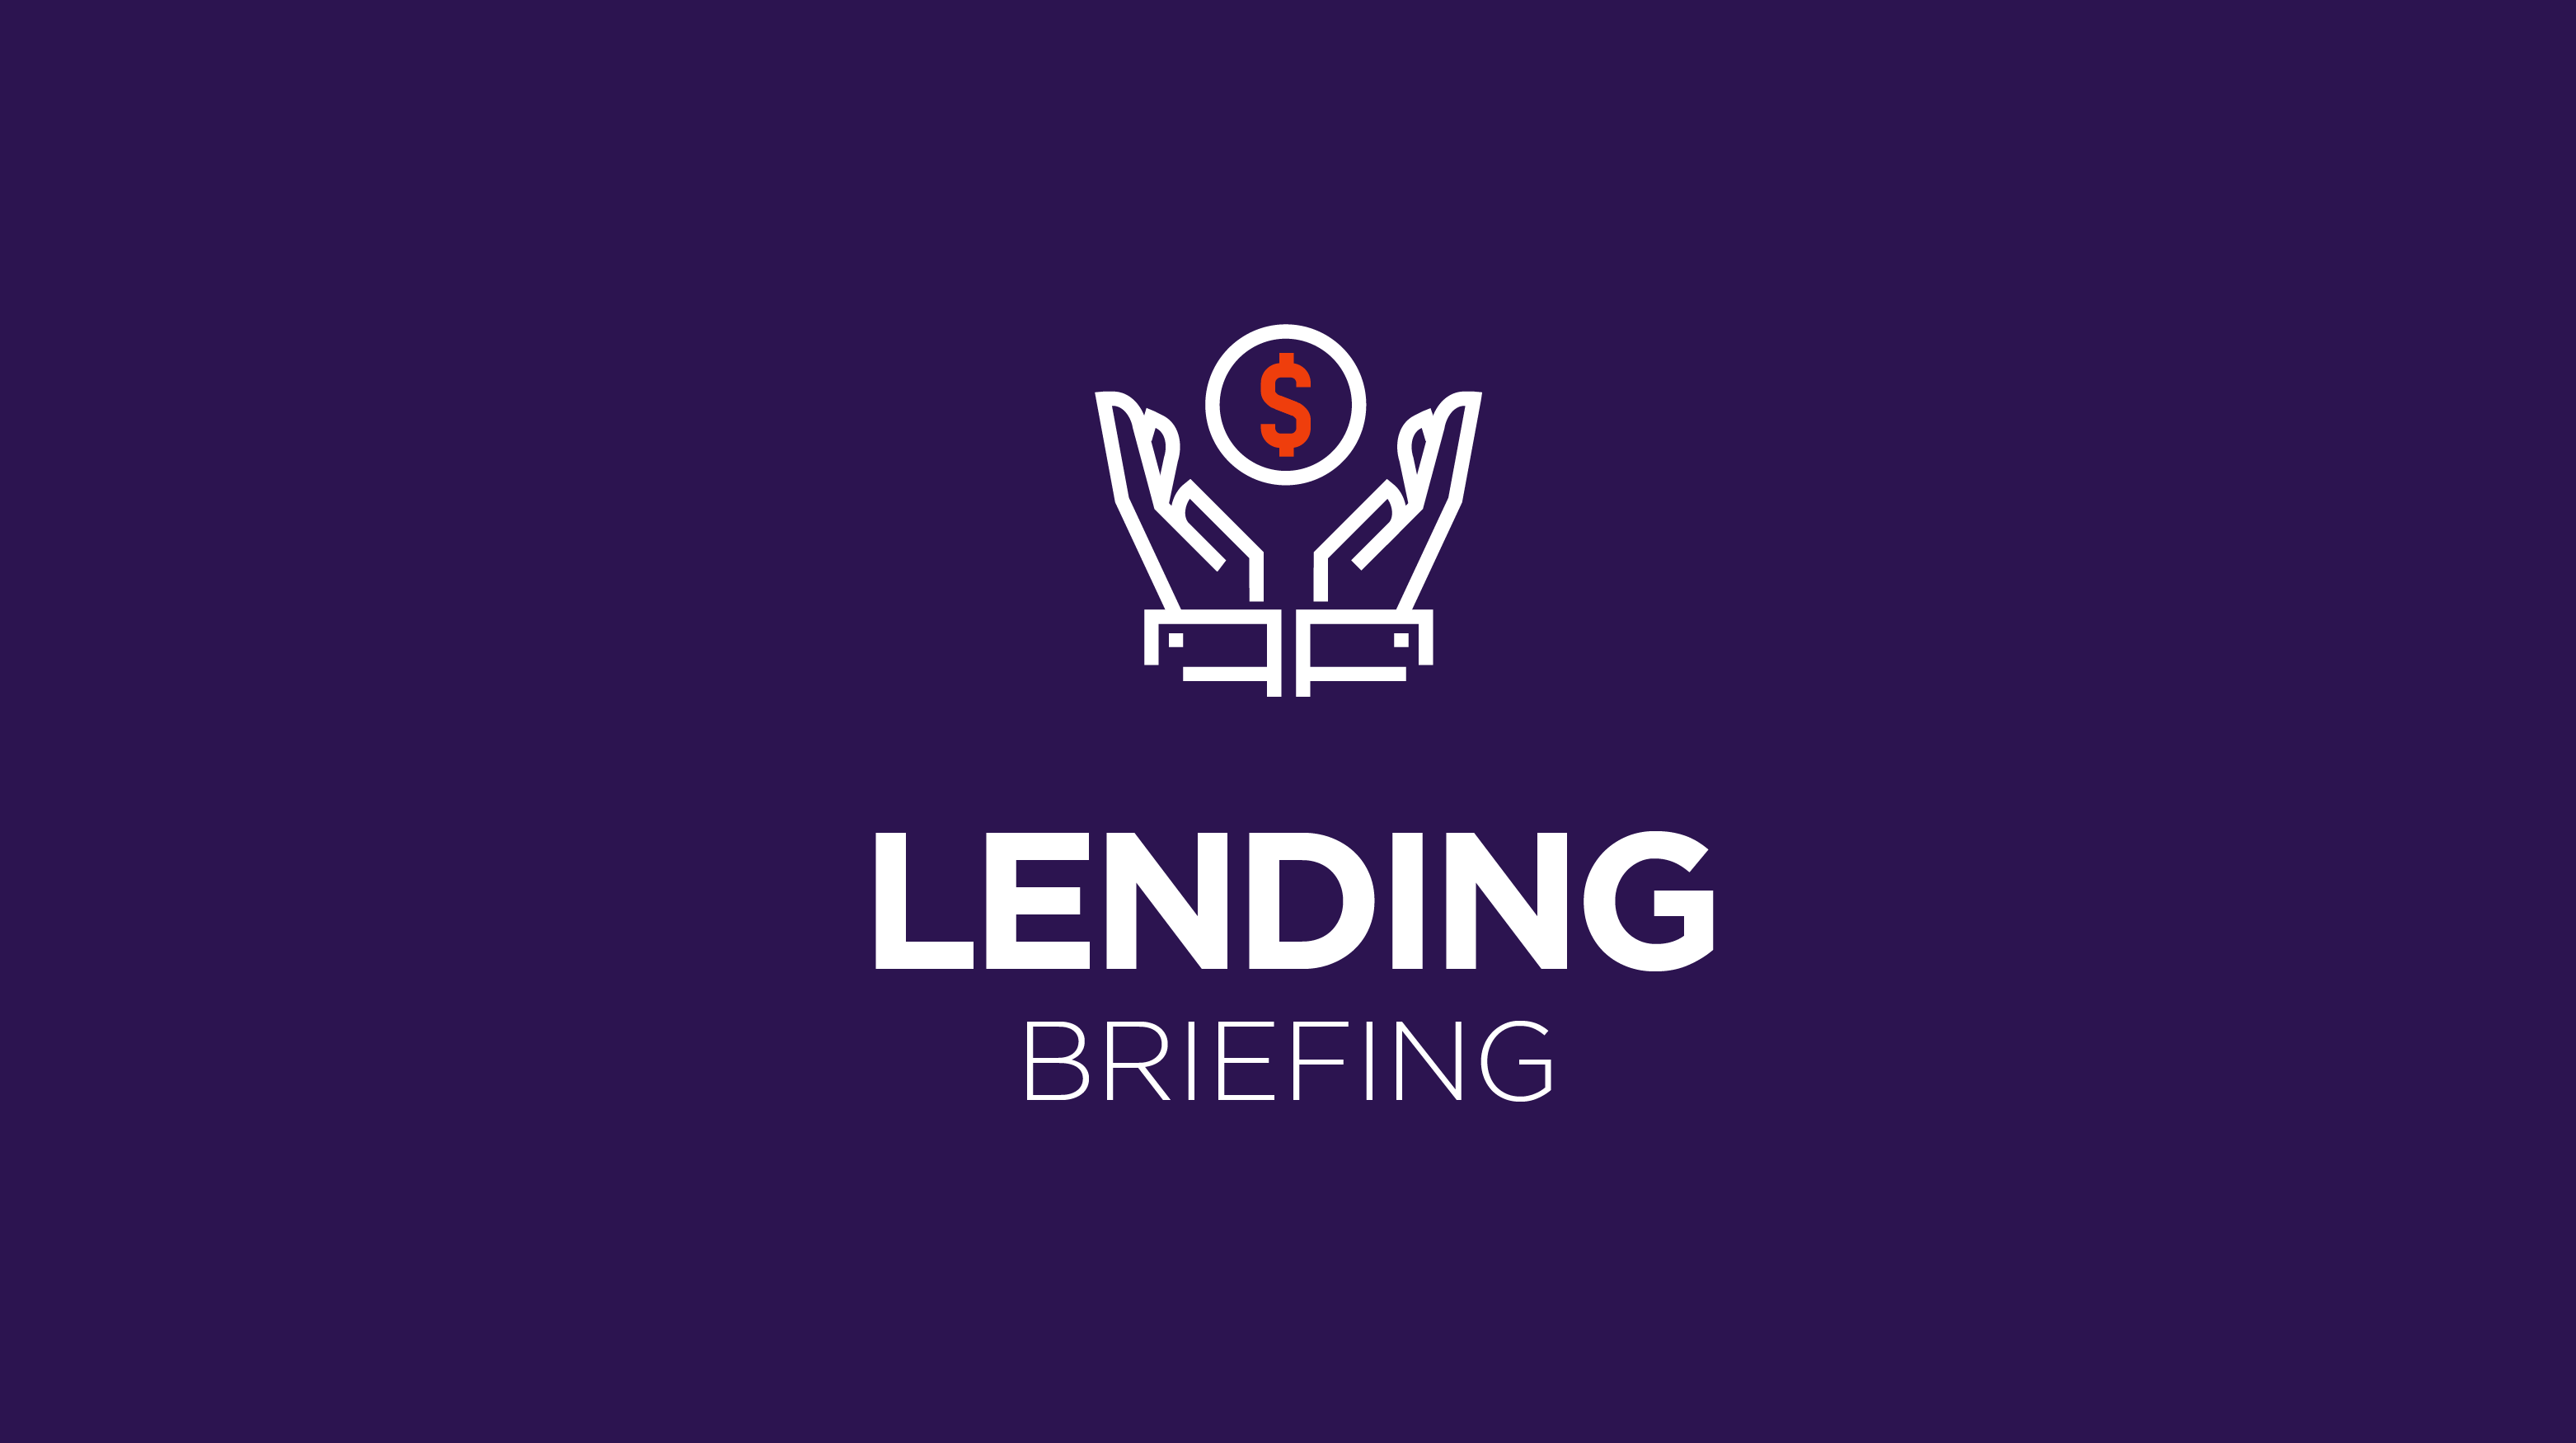 Lending Briefing: Debit cards are taking over